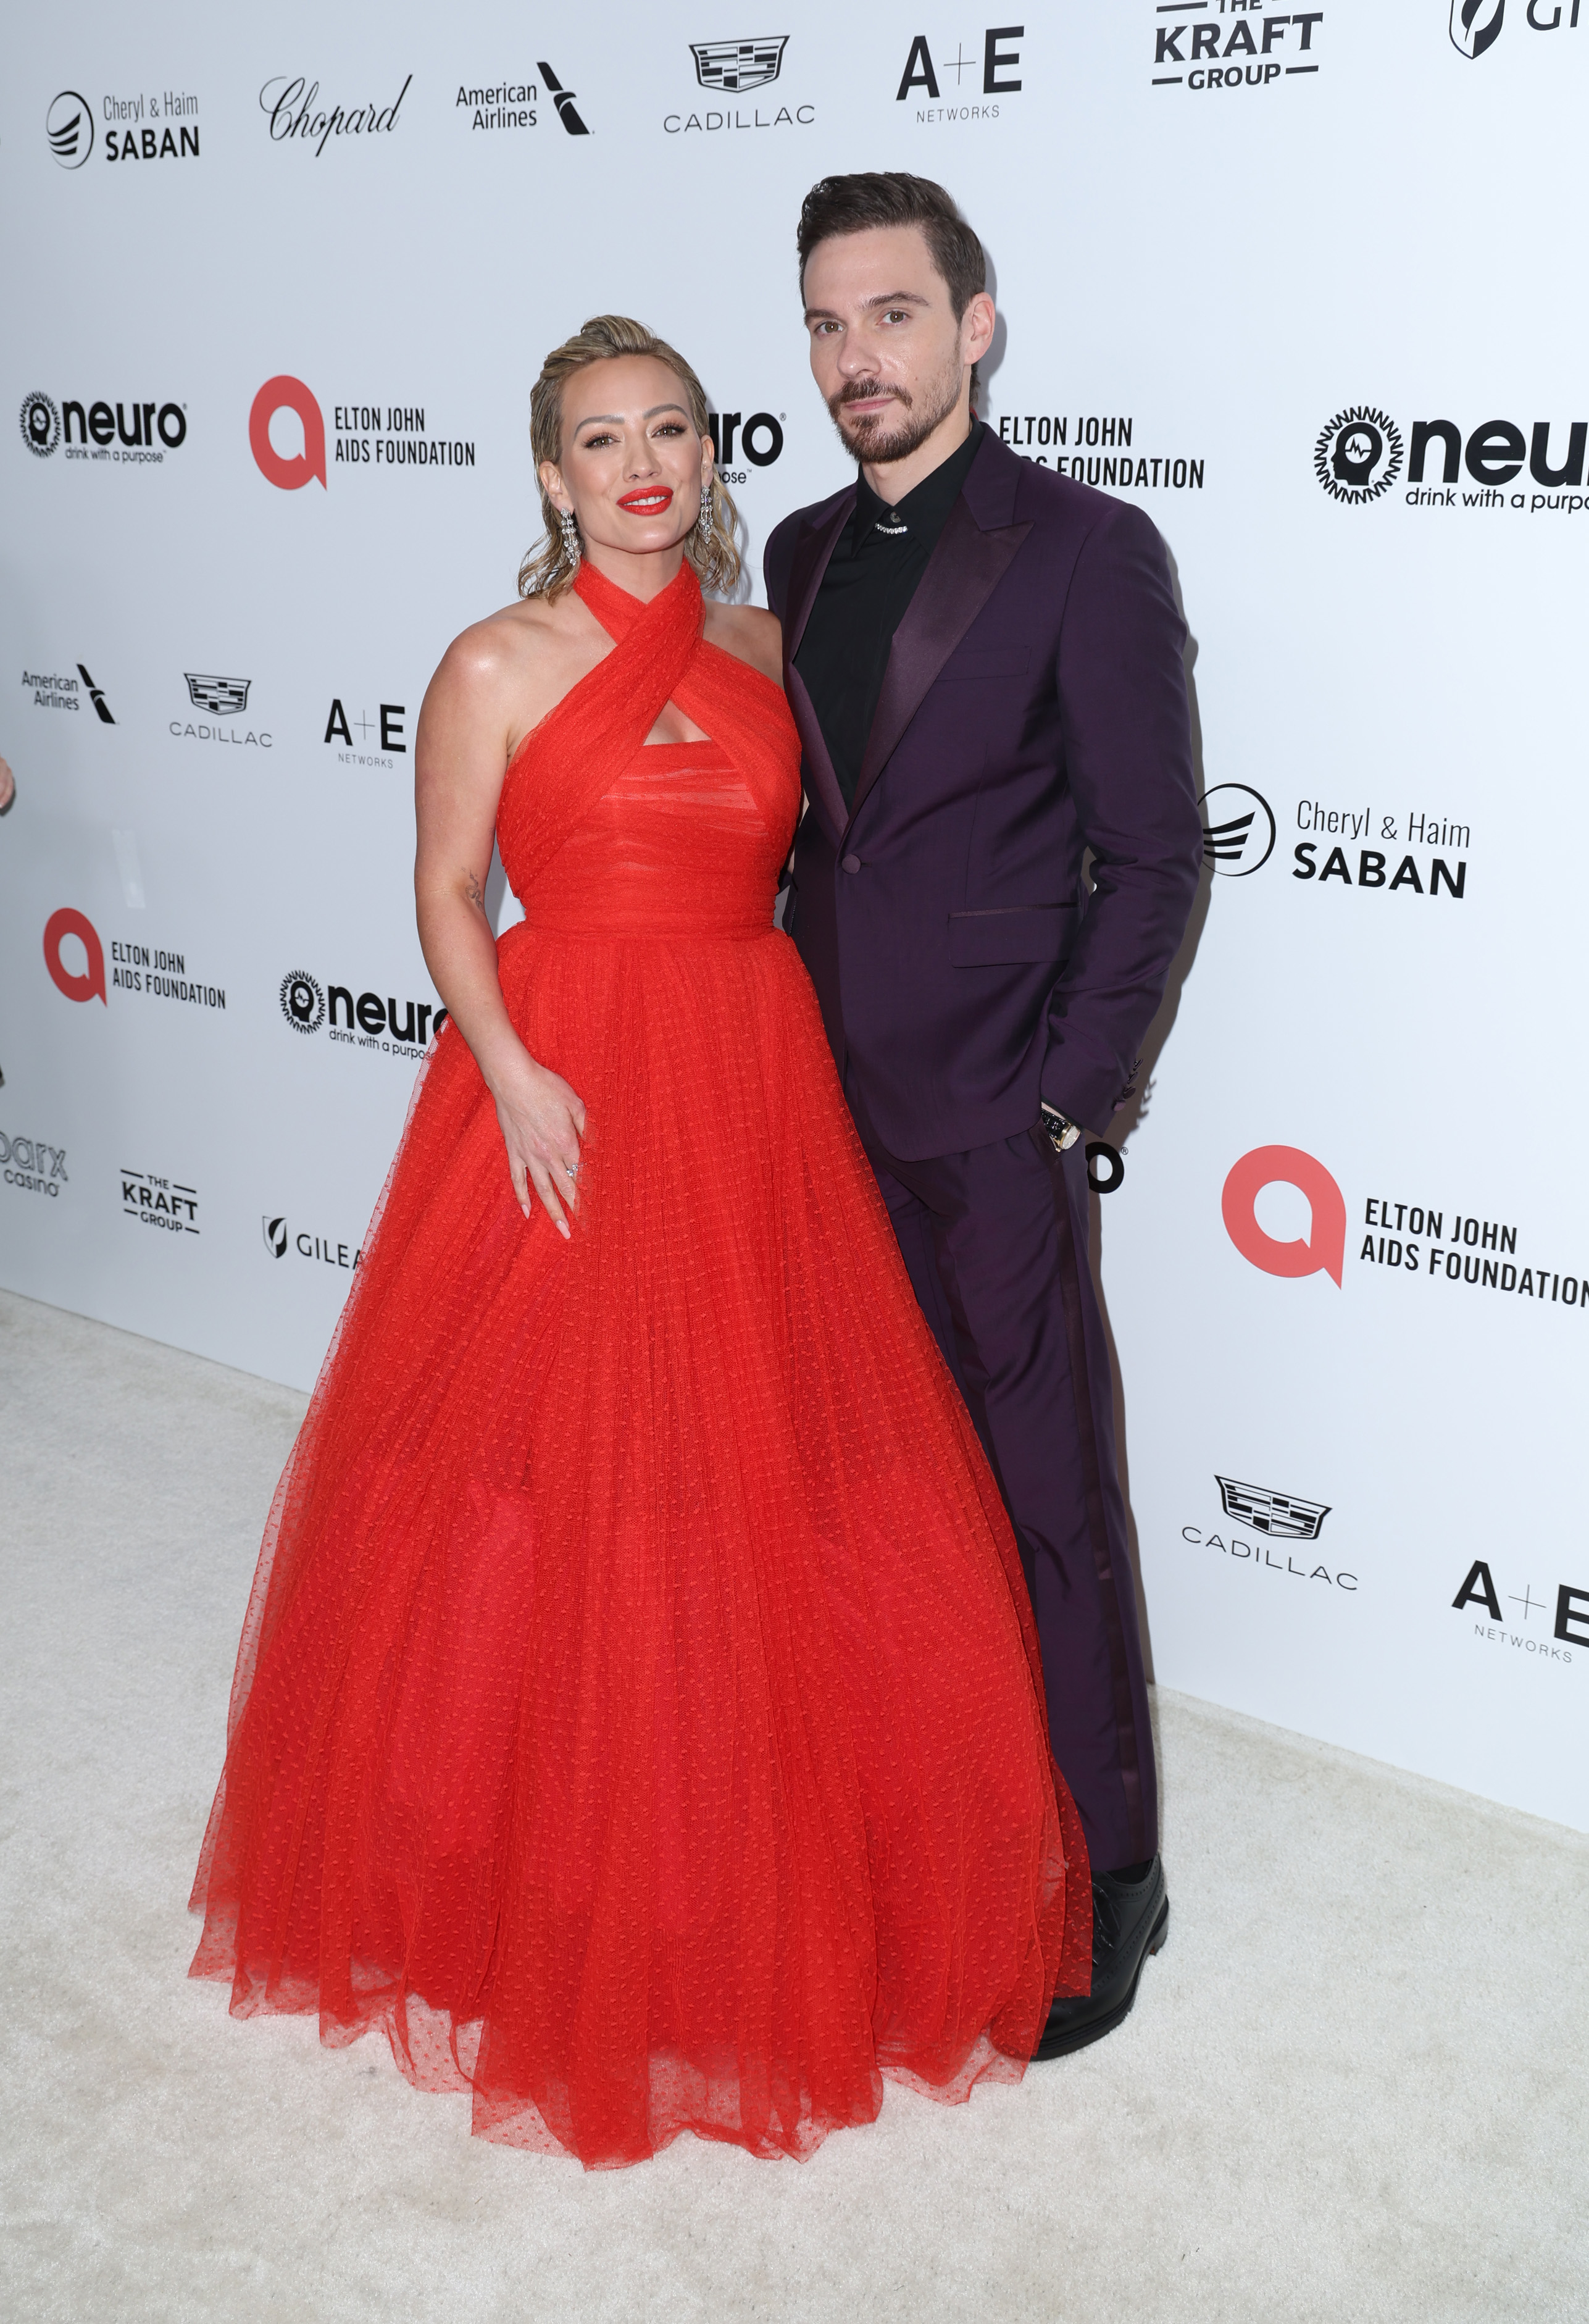 hilary wearing a tulle gown and matthew in a suit for an event